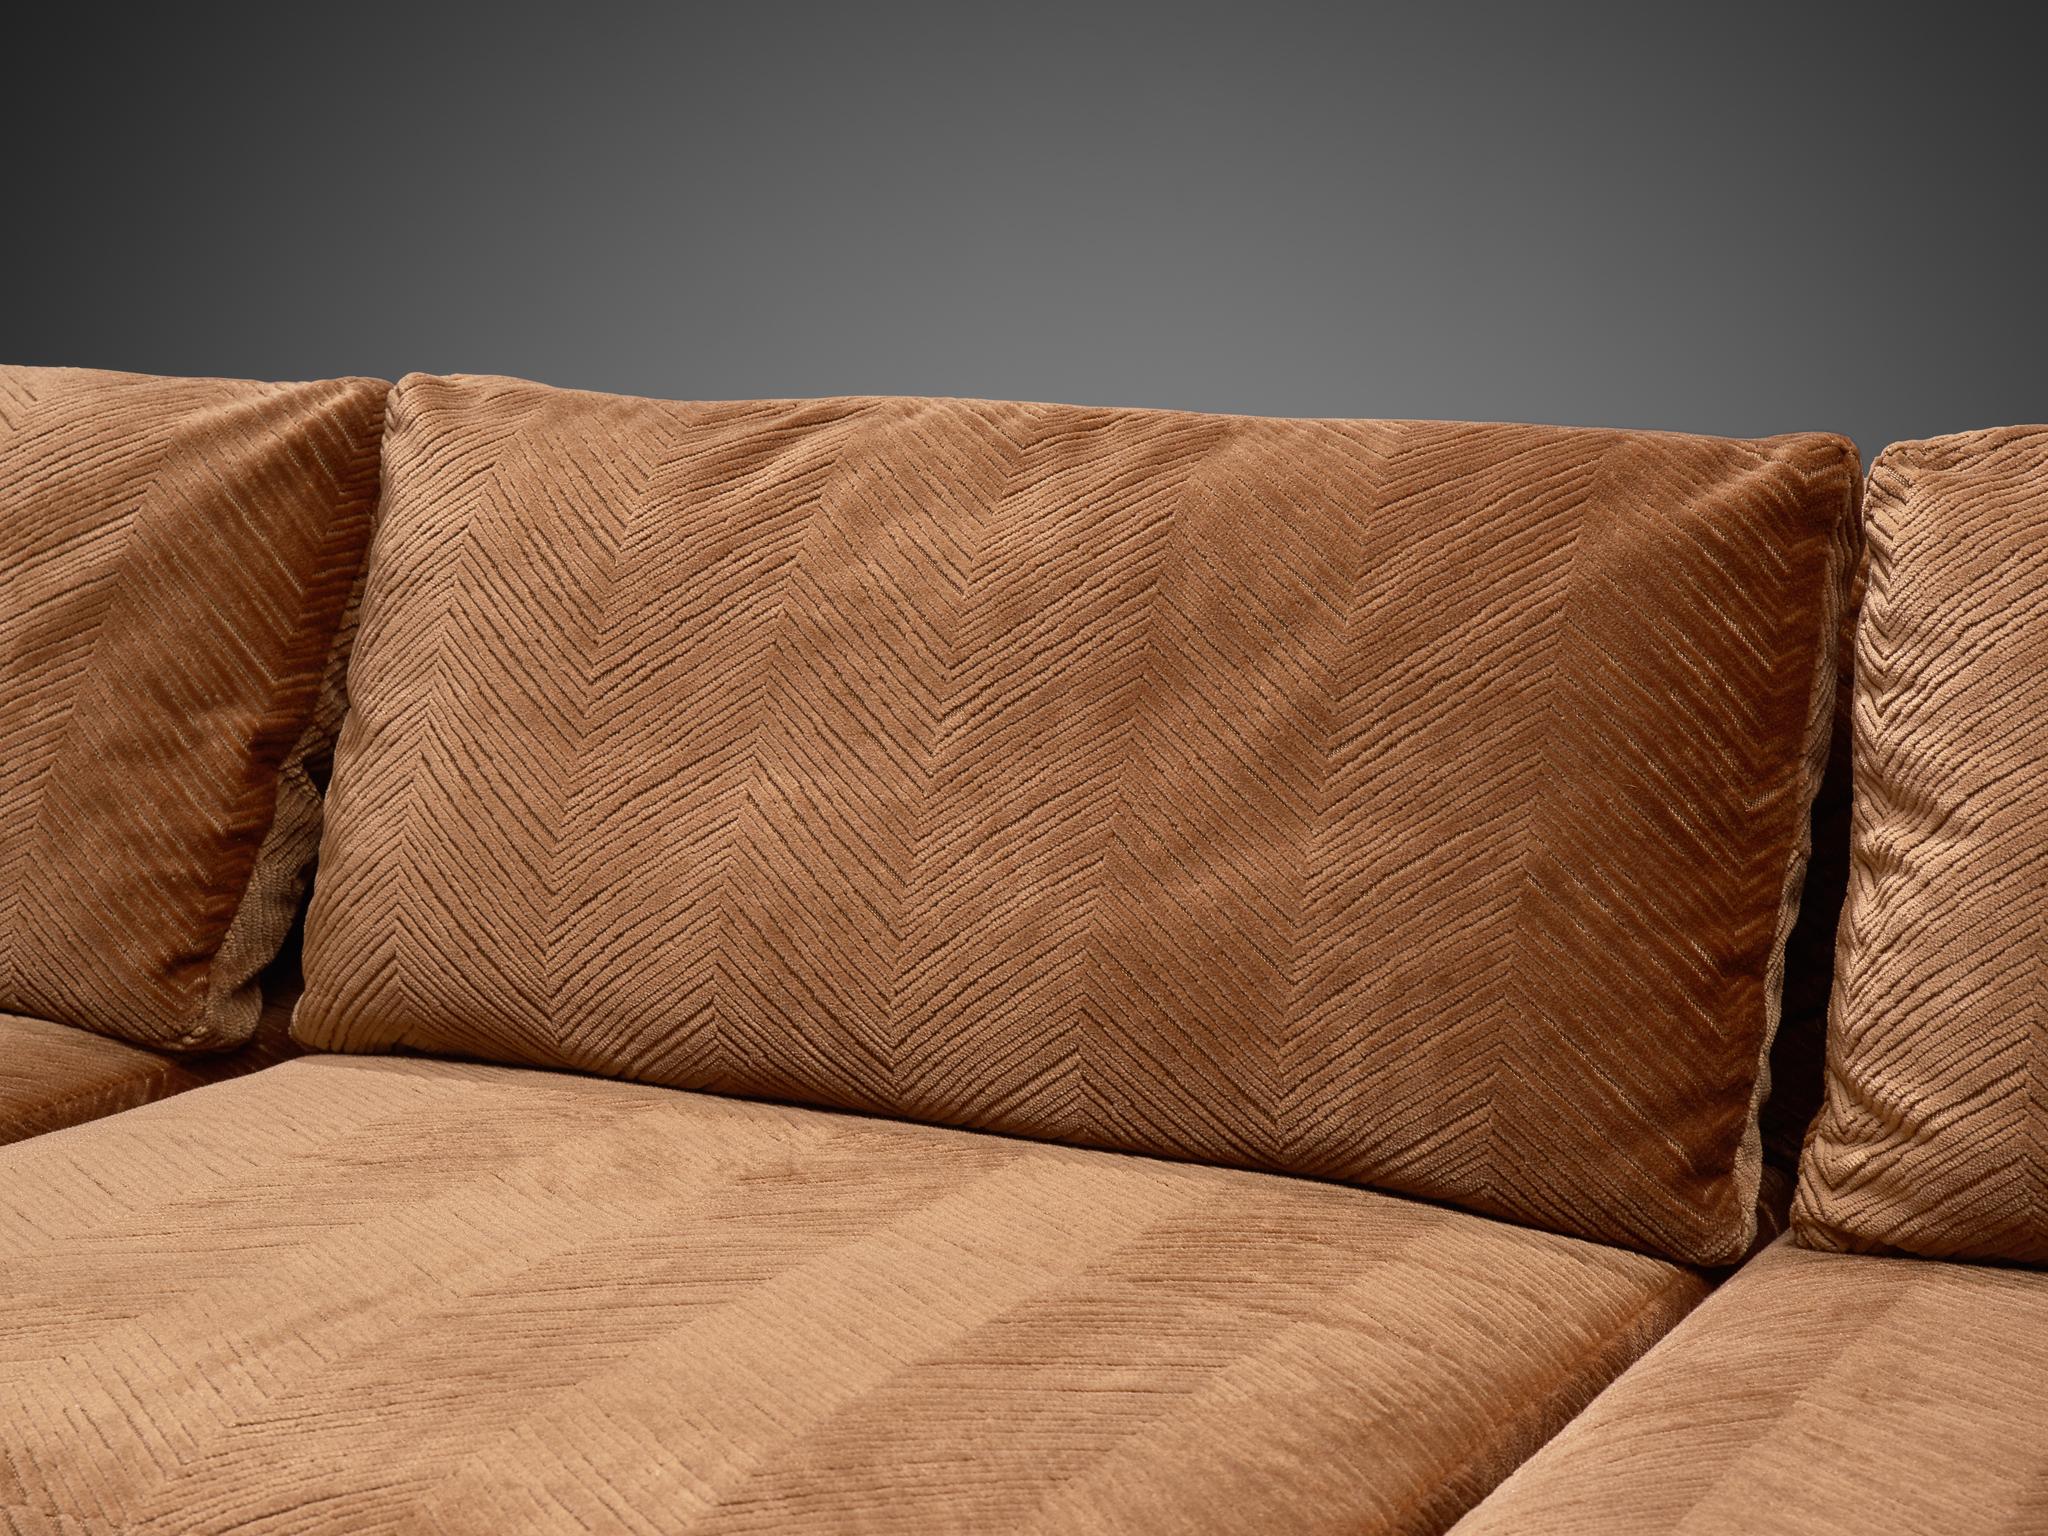 German Large Sectional Sofa in Camel Colored Fabric, 1970s